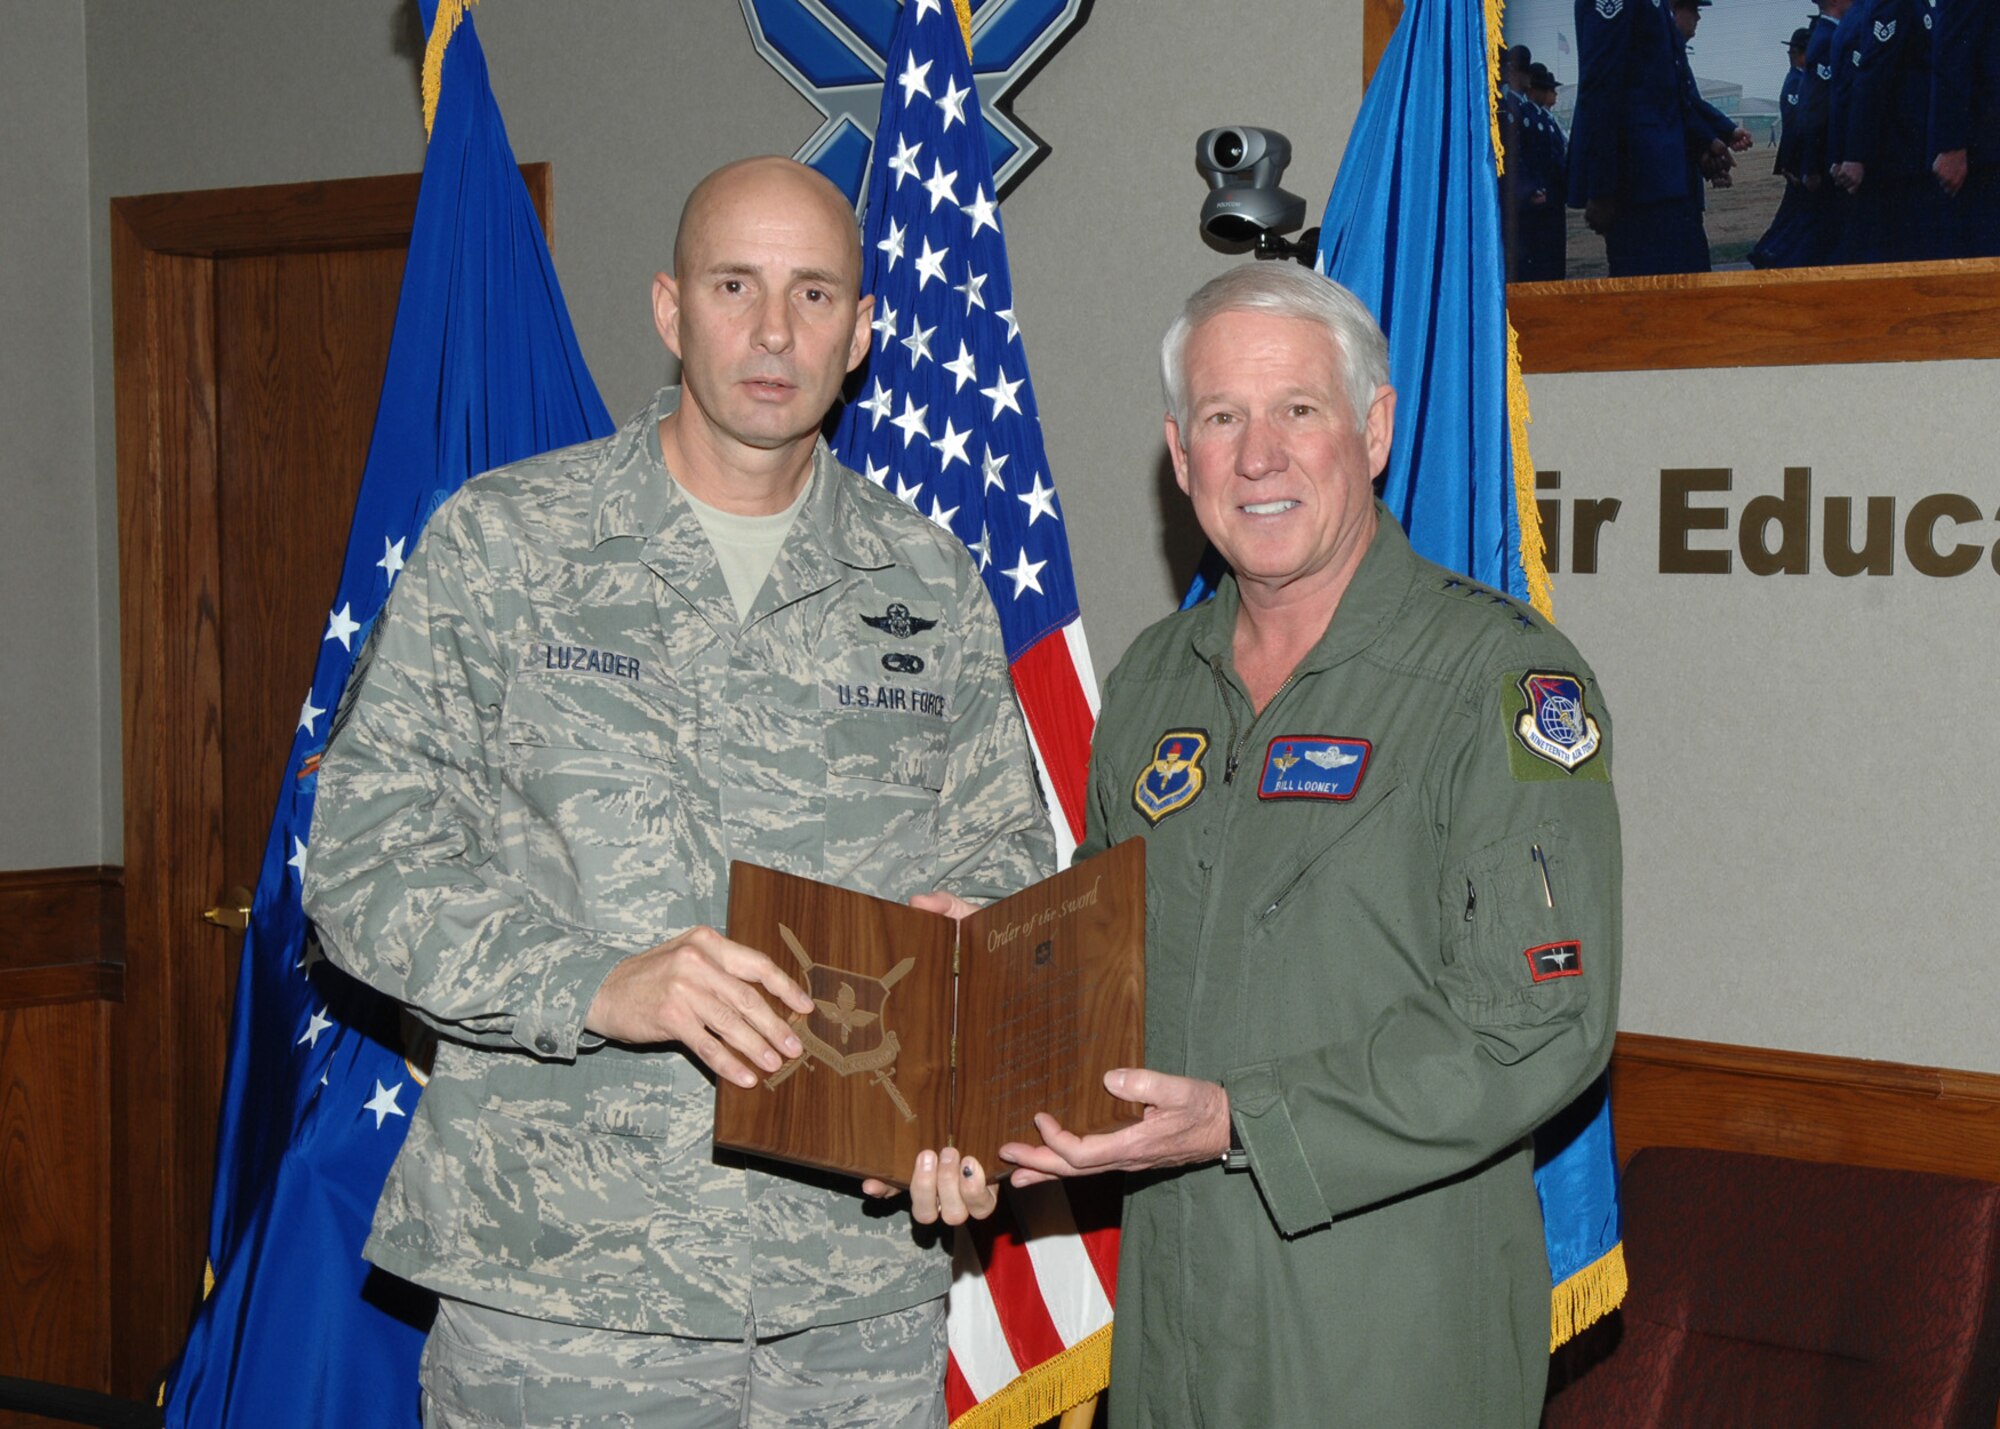 Chief Master Sgt. Mark Luzader, Air Education and Training Command command chief master sergeant, presents Gen. William R. Looney III, AETC commander, an invitation plaque Feb. 13 to receive the Order of the Sword at a ceremony May 30. (U.S. Air Force photo by Joel Martinez)
